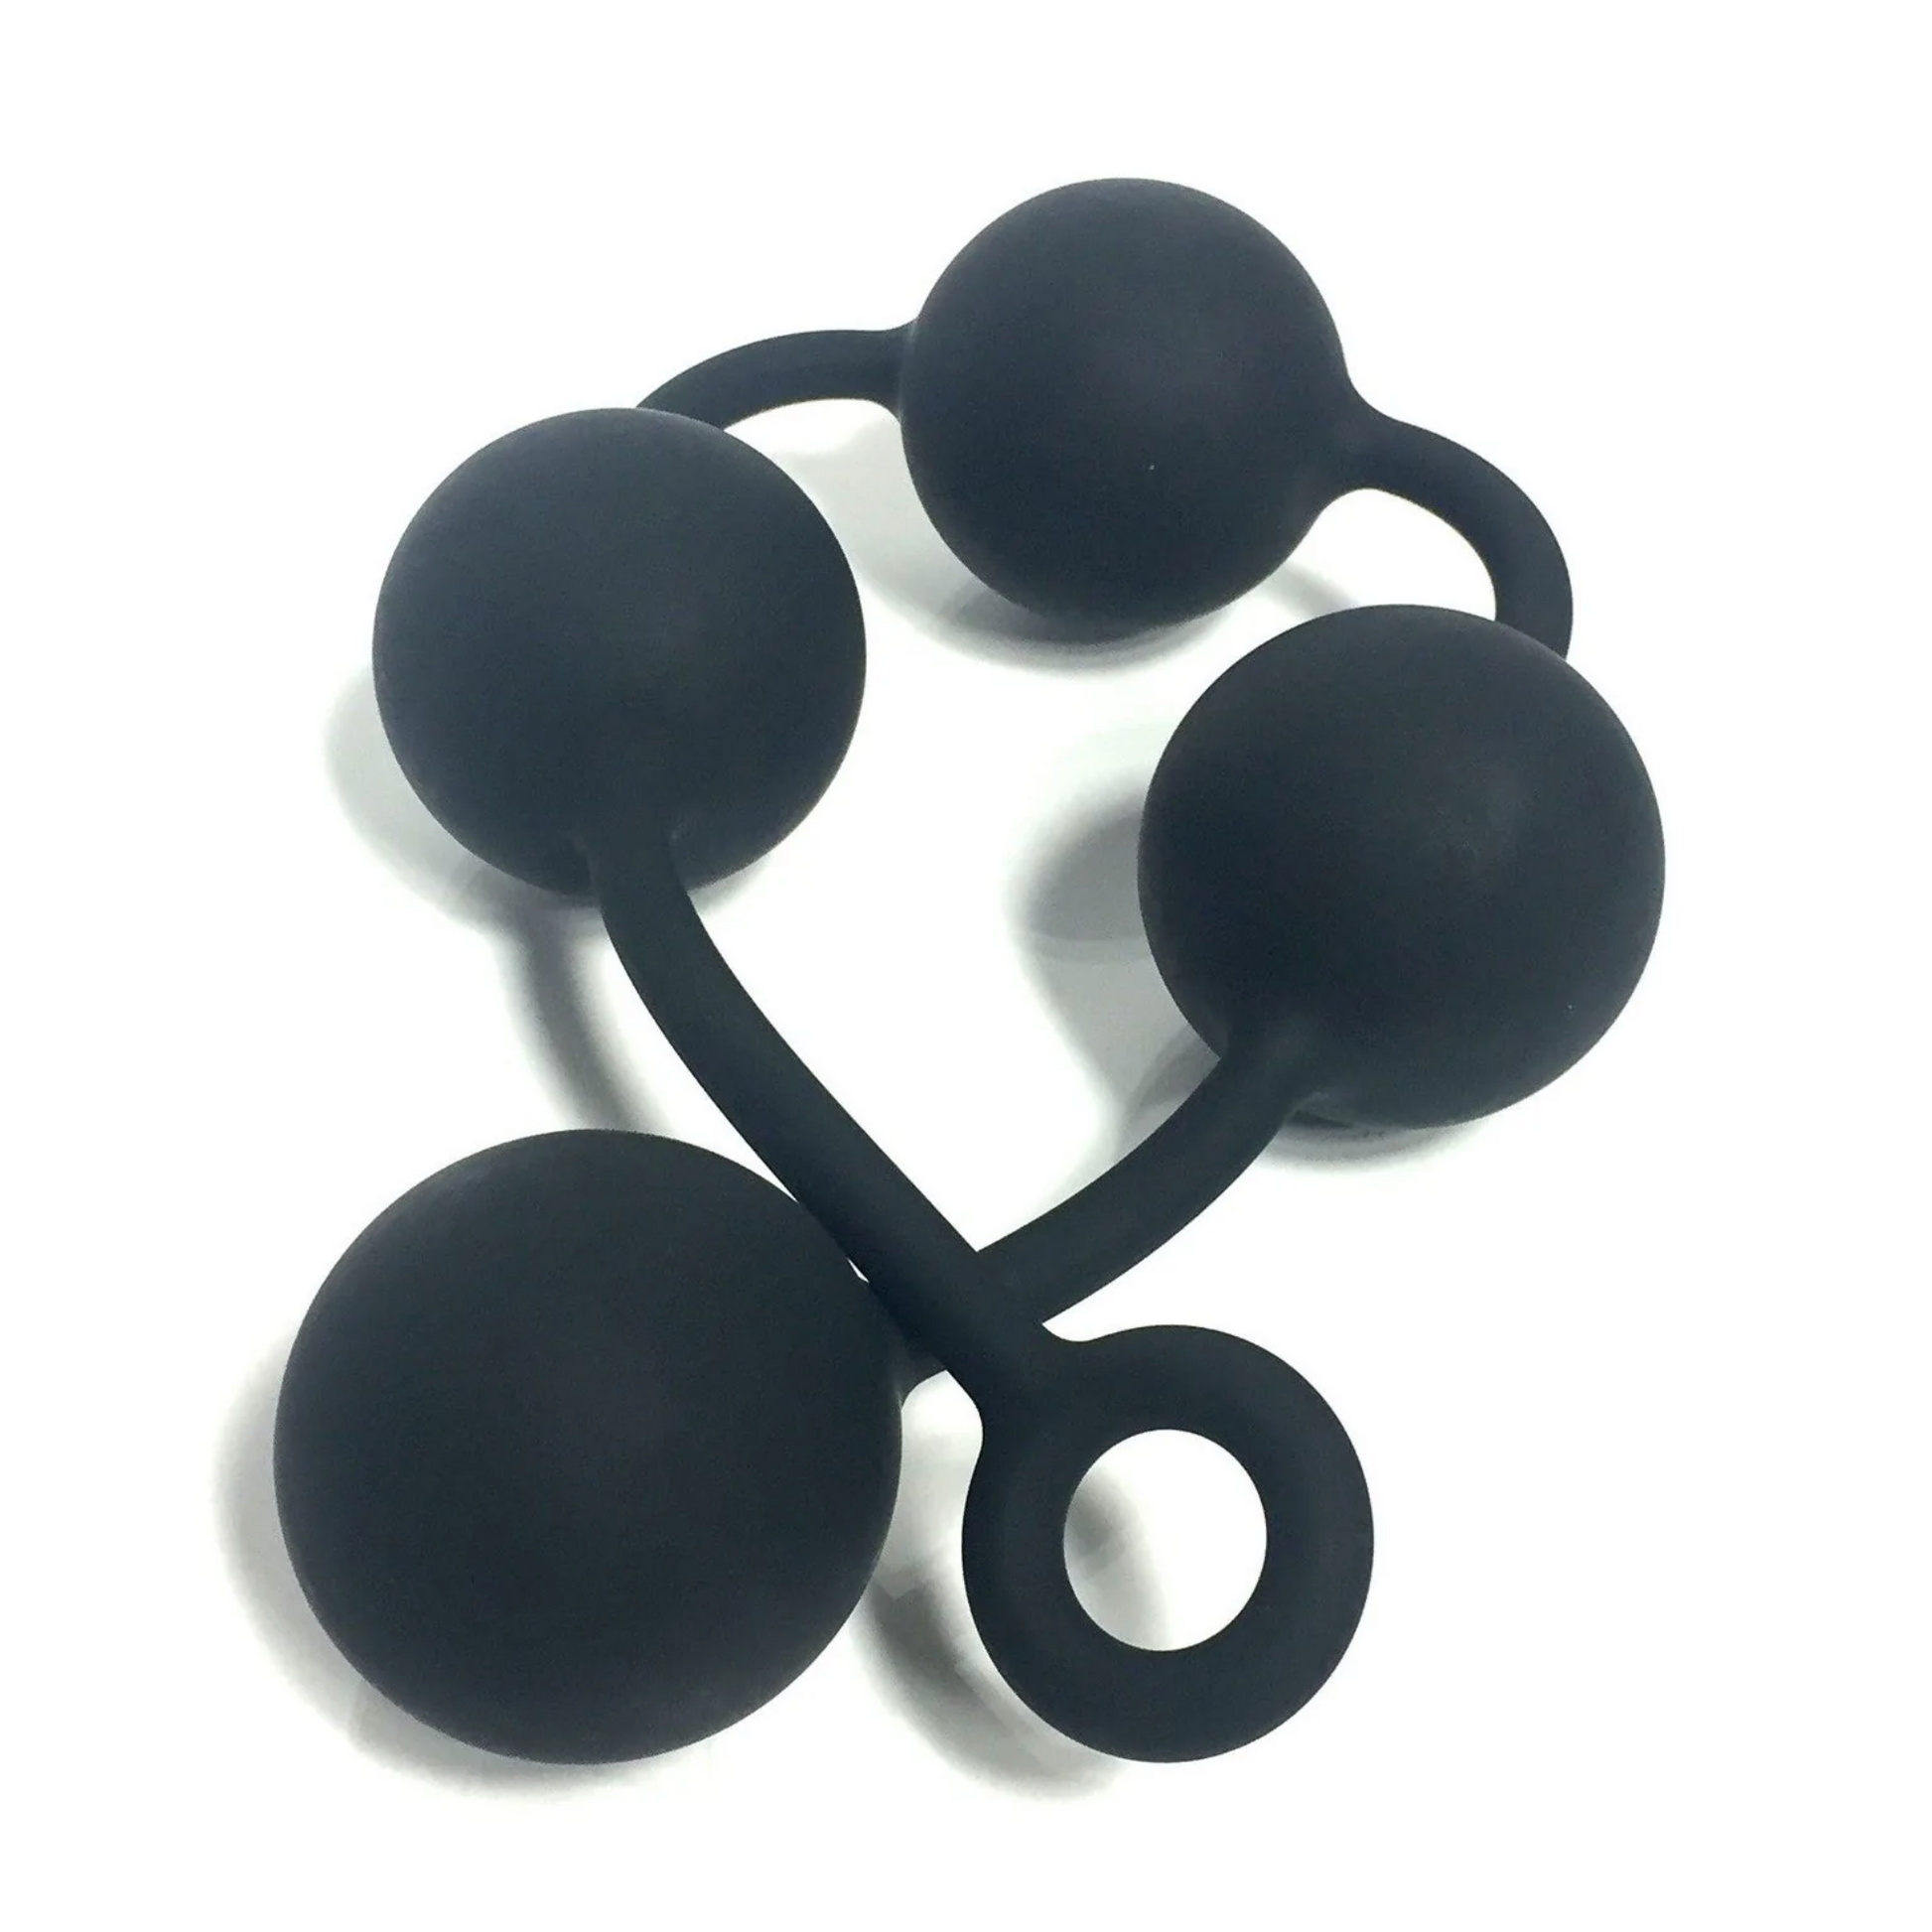 Four black silicone balls on a thin line, all seamless in one piece, with a loop in the handle. The toy is doubled over itself to show its flexibility.